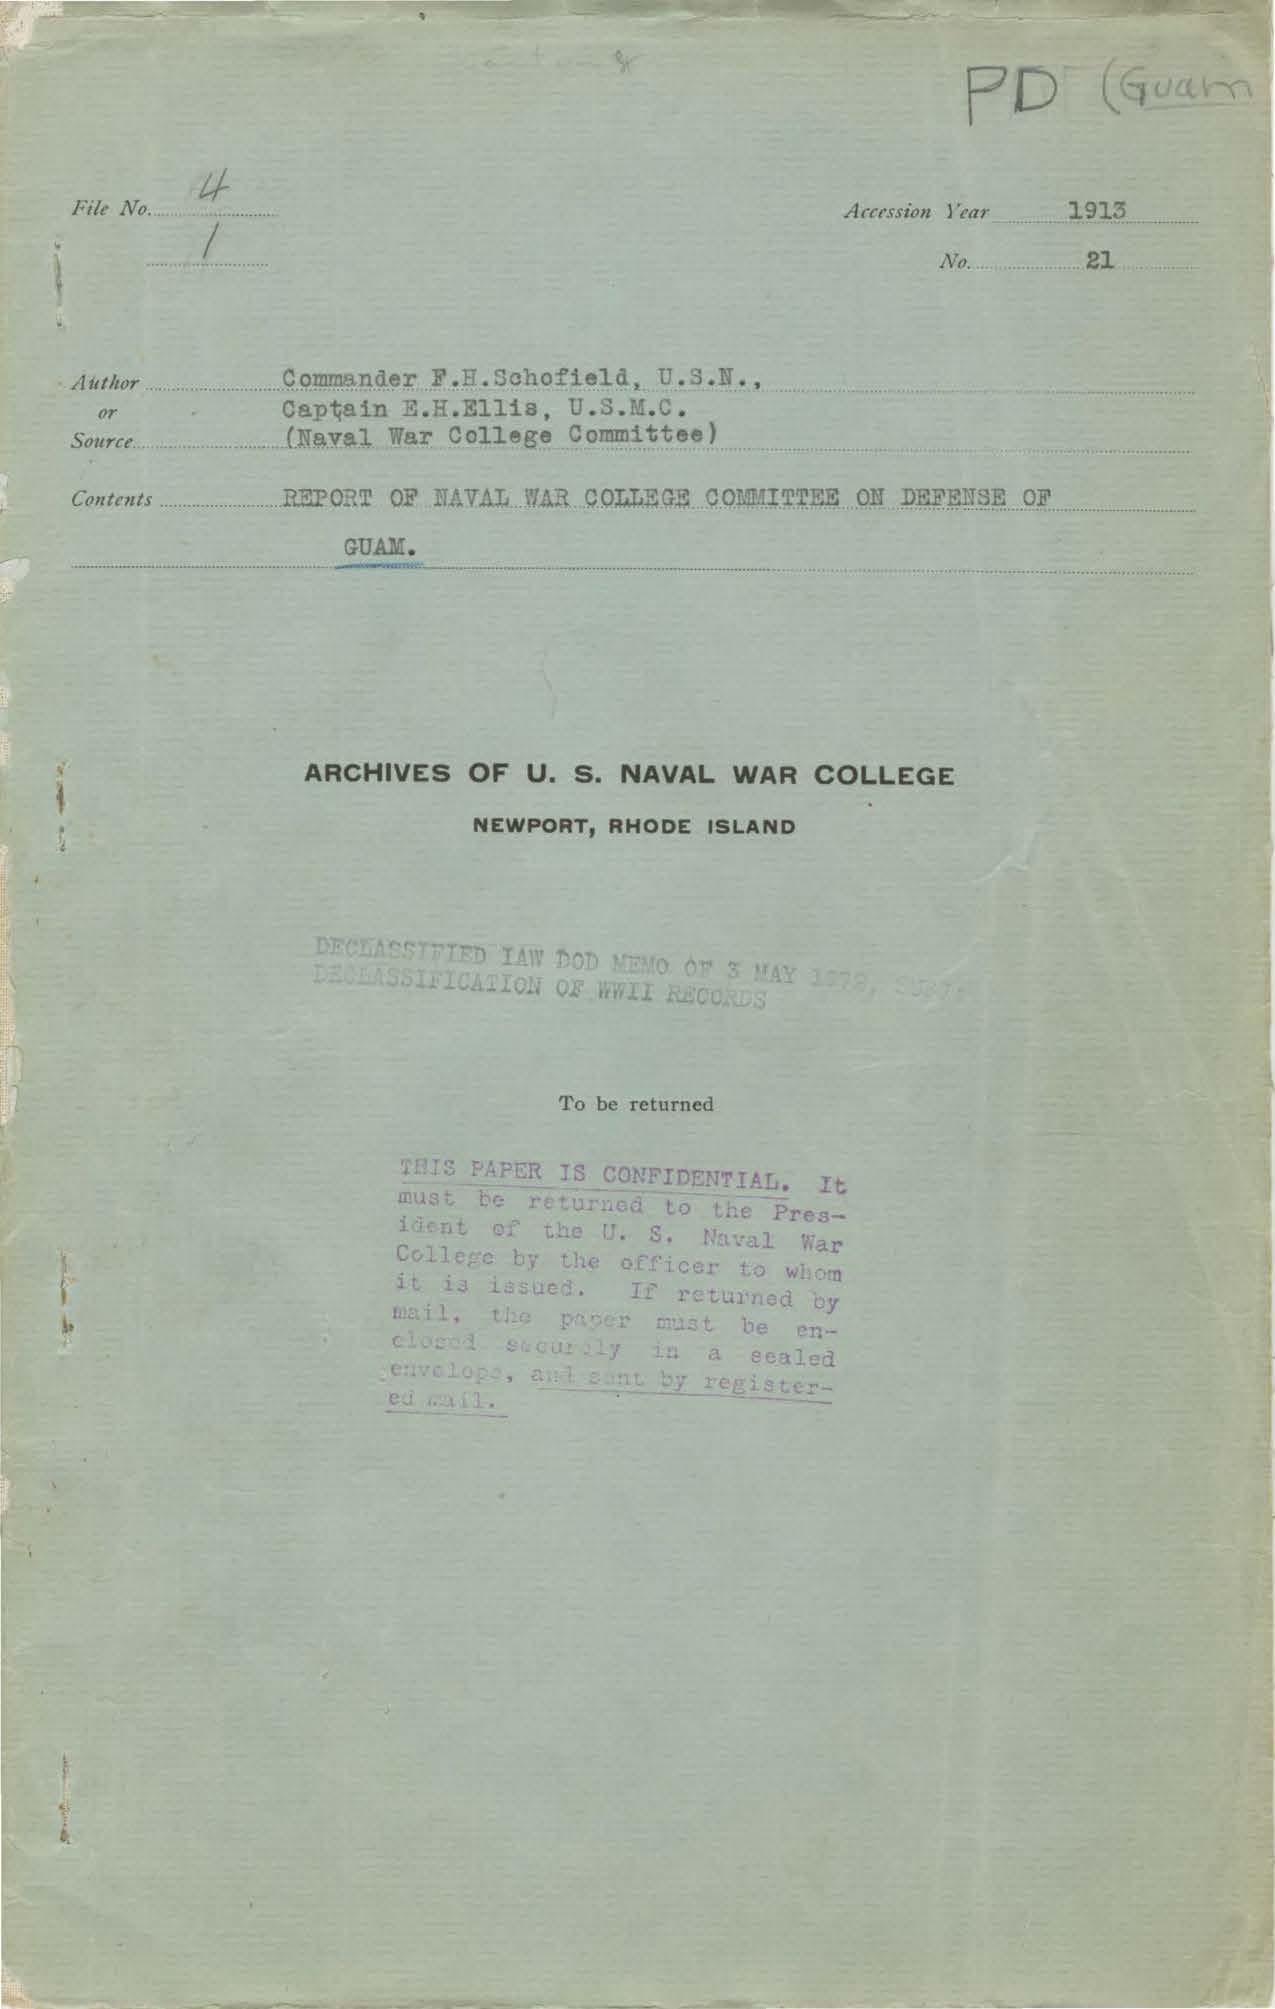 Report of Naval War College Committee on Defense of Guam, F. H. Schofield and E. H. Ellis